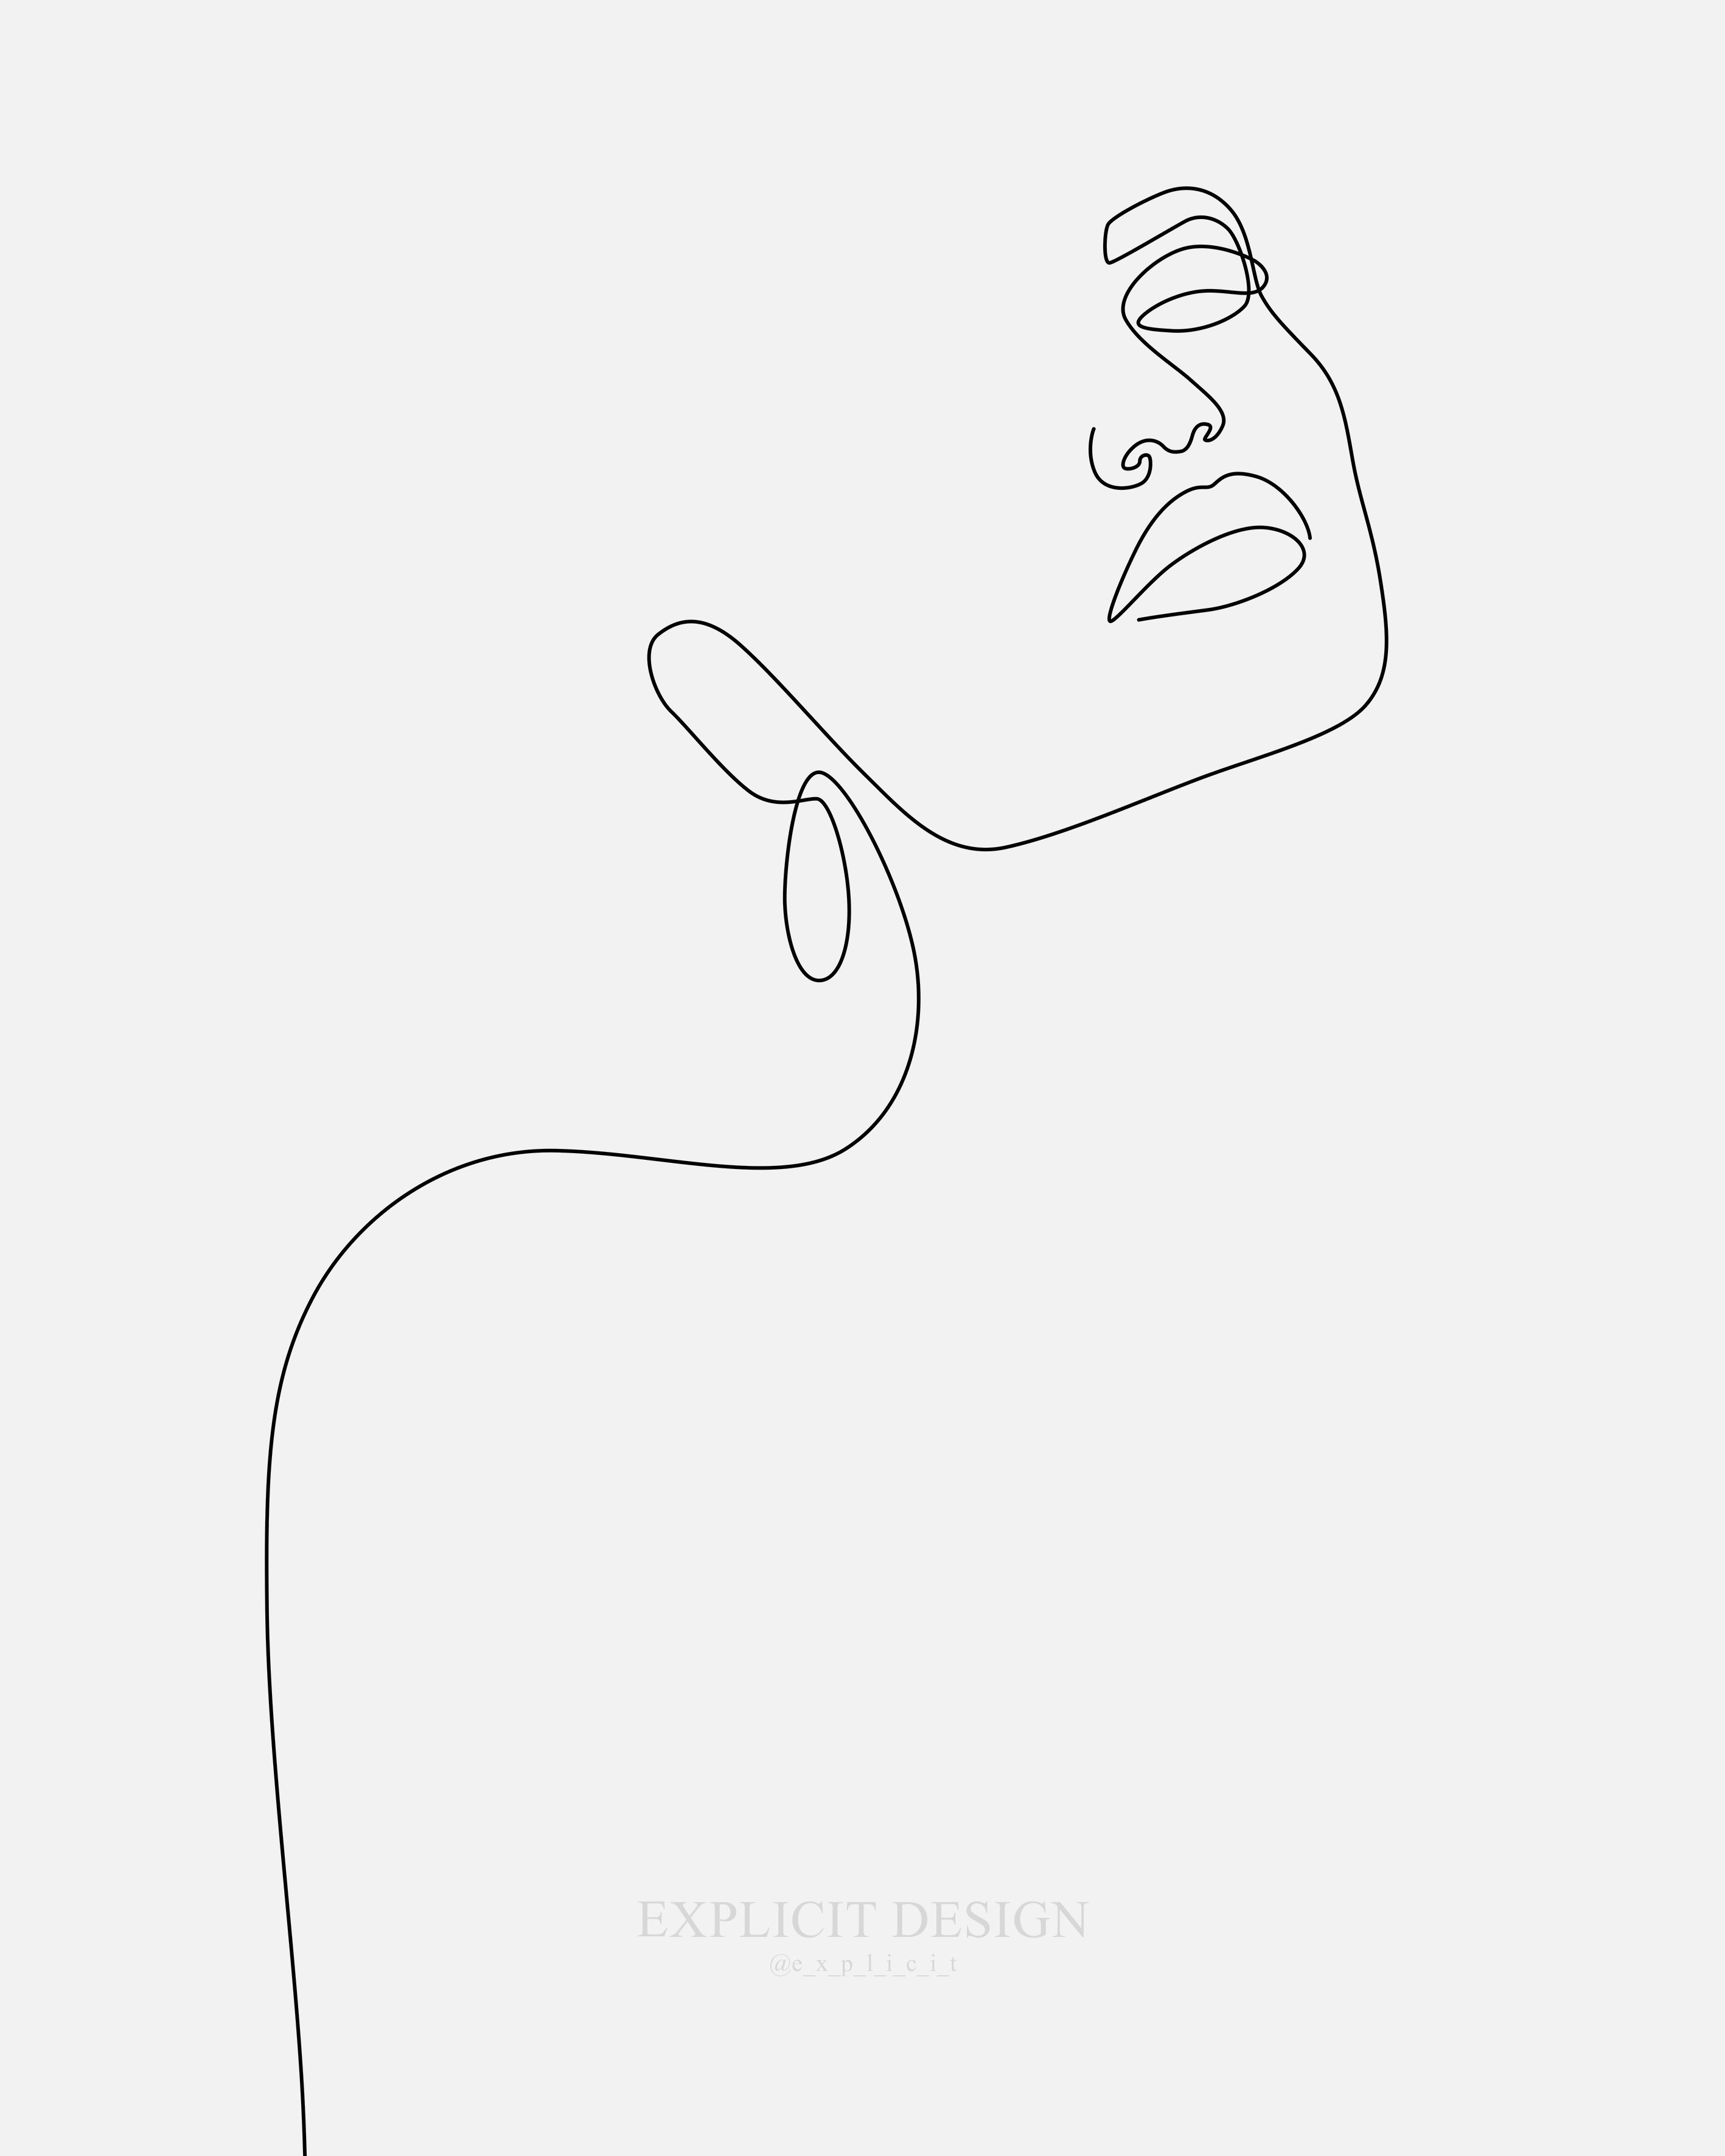 Dreamy Girl by Explicit Design - Dreamy Girl by Explicit Design -   15 beauty DIY drawing ideas